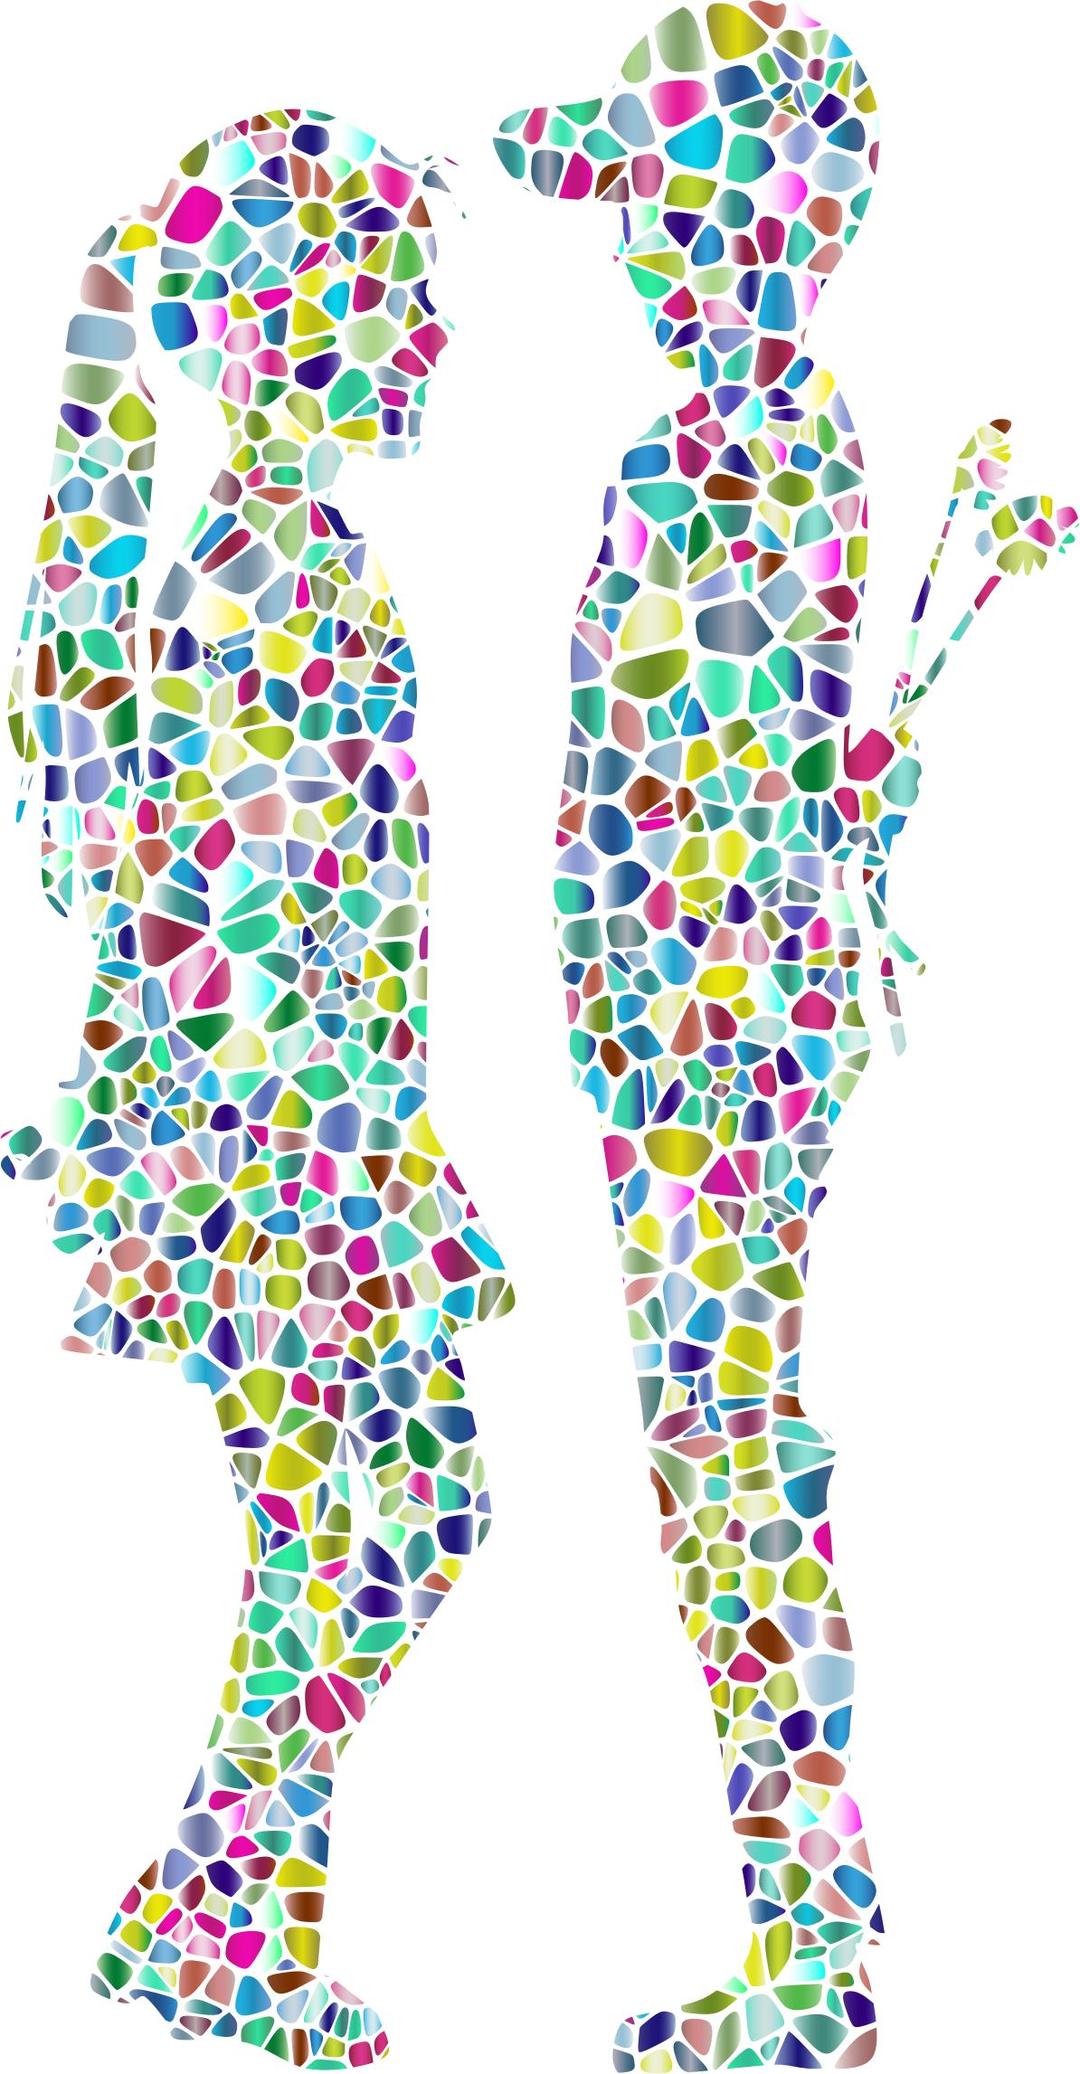 Polyprismatic Tiled Boy Giving Flowers To Girl Silhouette png transparent